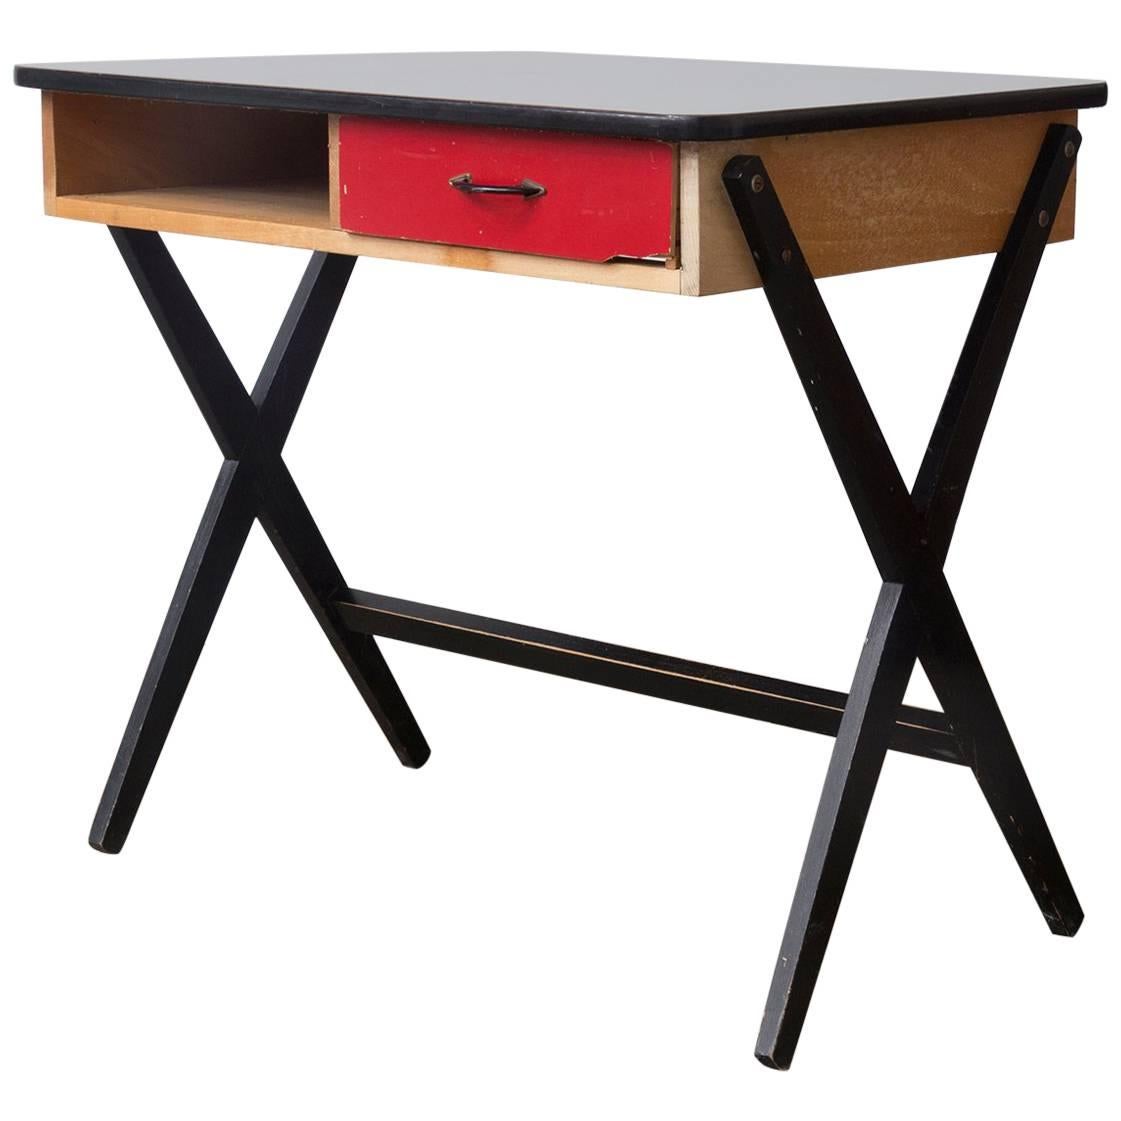 1954, Coen de Vries for Devo Wooden Writing Desk with Red Drawer and Formica Top For Sale